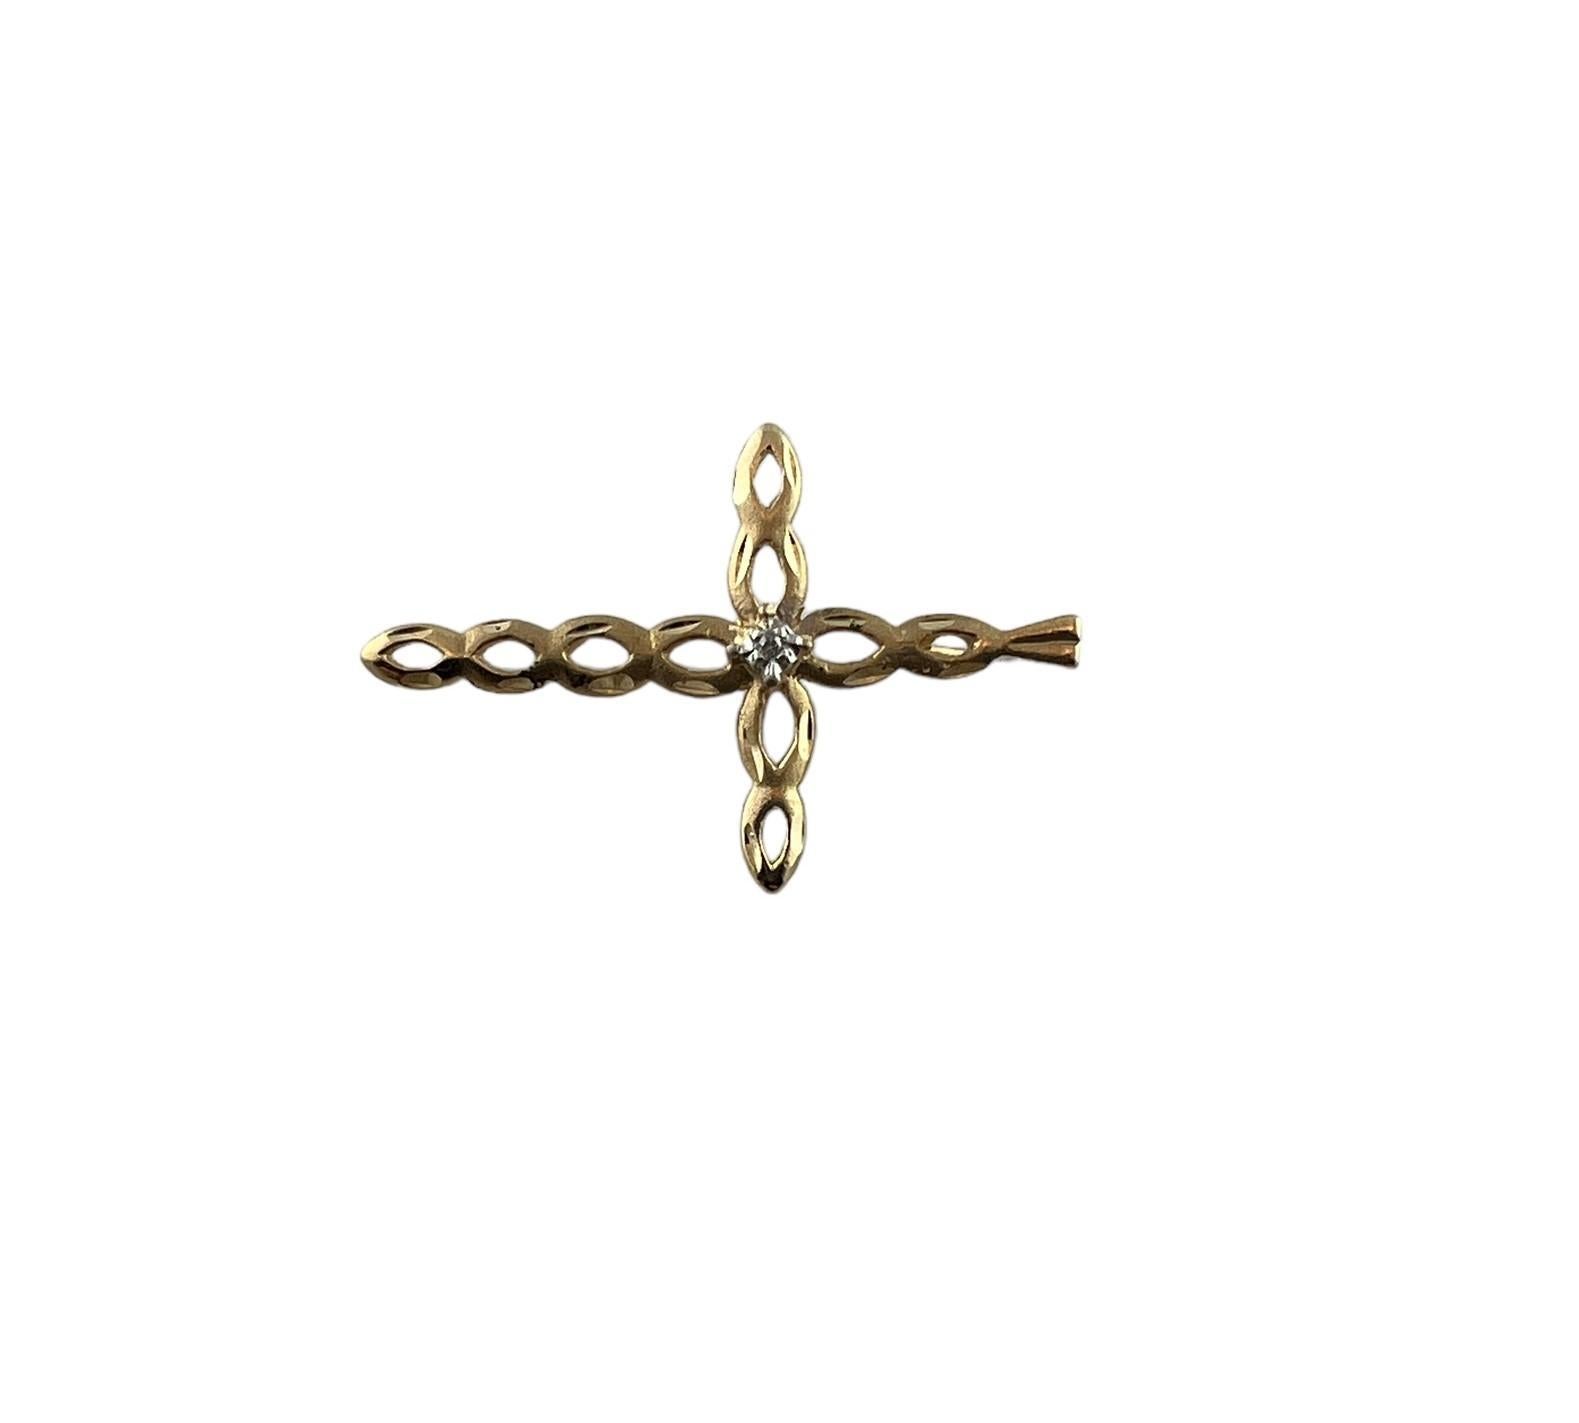 18K Yellow Gold Diamond Cross Pendant

This cross pendant is set in 18K yellow gold with a single cut diamond in its center

The diamond is approx. .005cts and SI1 clarity, H color

Pendant measures approx. 29.2 mm x 19.1 mm x 1.0 mm

0.8  grams /